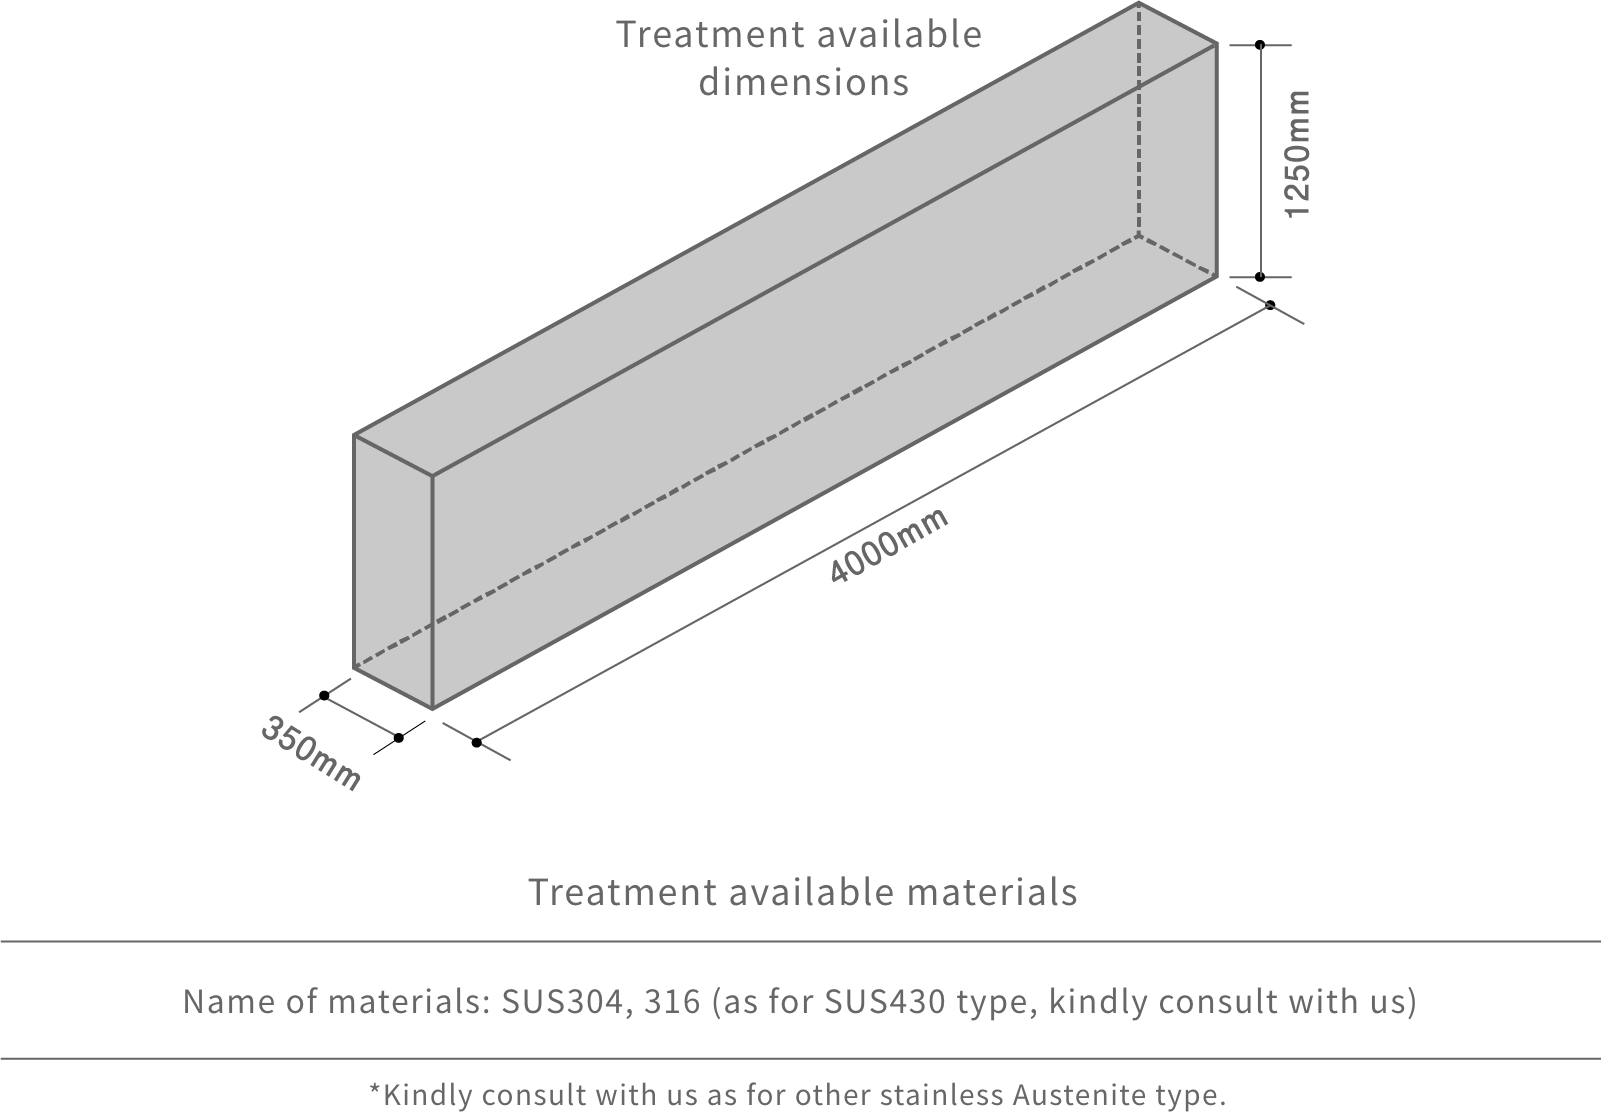 Treatment available dimensions